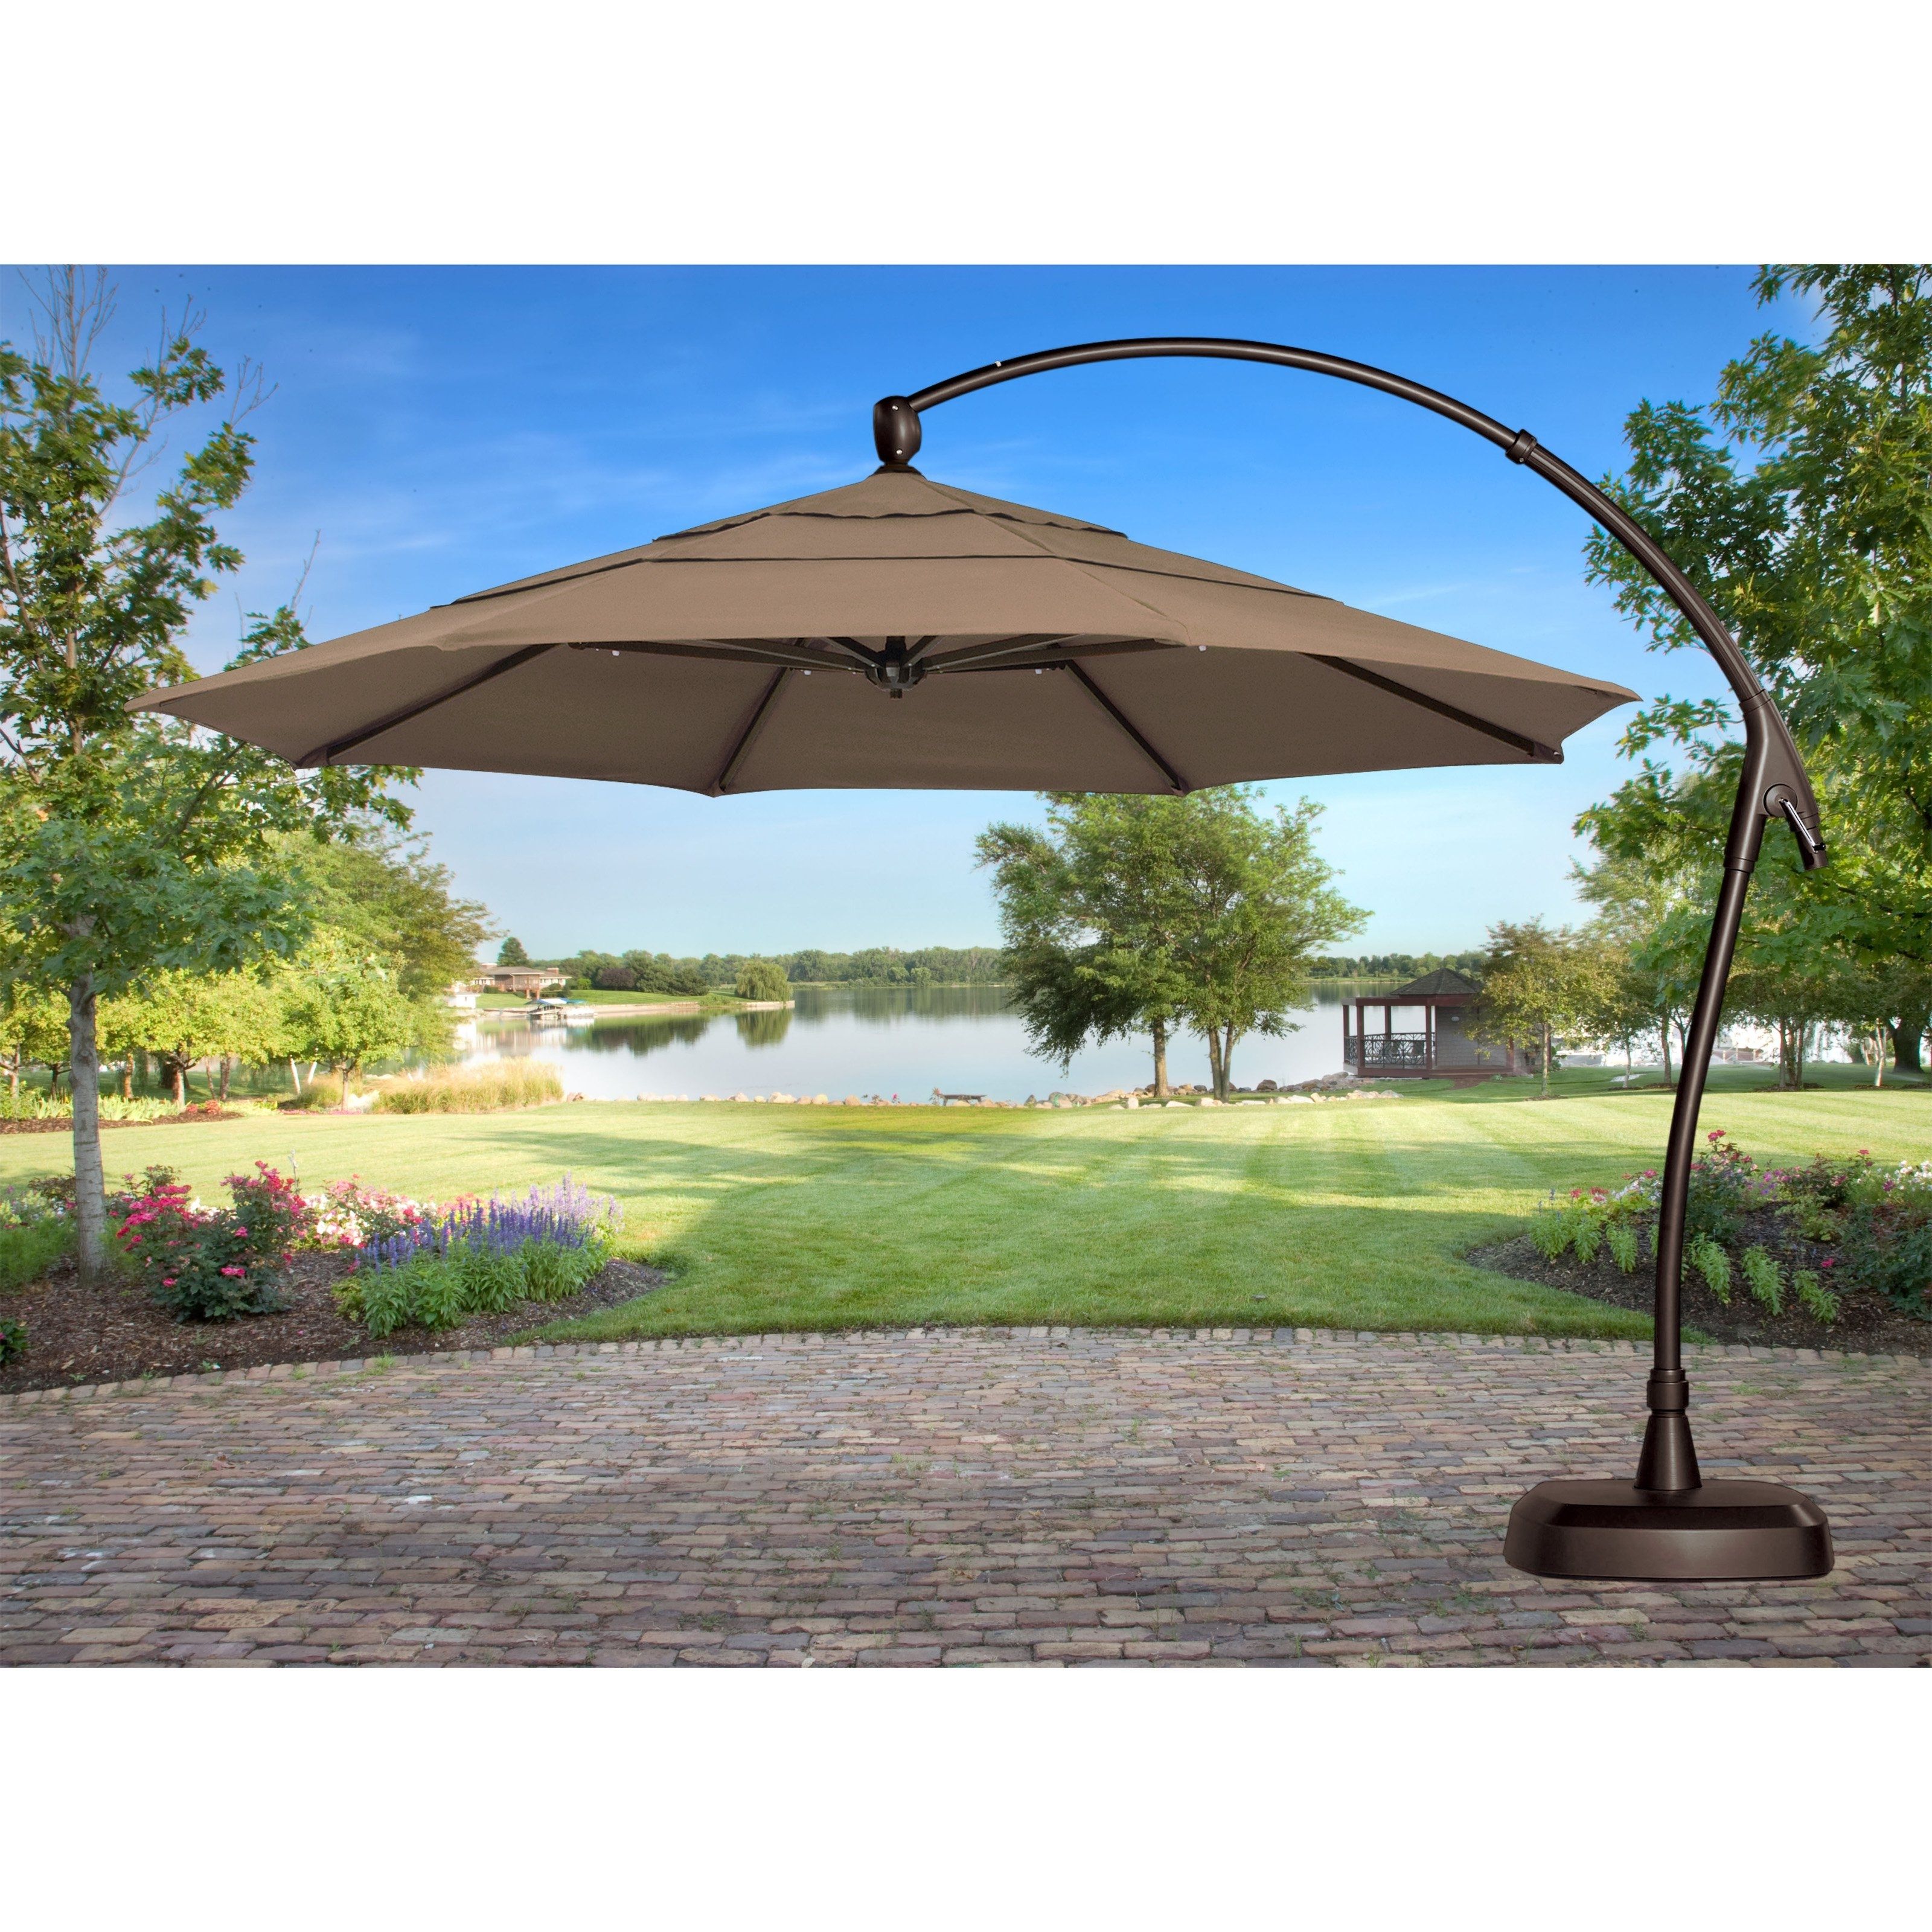 Stylish And Convenient Cantilever Patio Umbrella – Carehomedecor With Most Current Cantilever Patio Umbrellas (View 8 of 20)